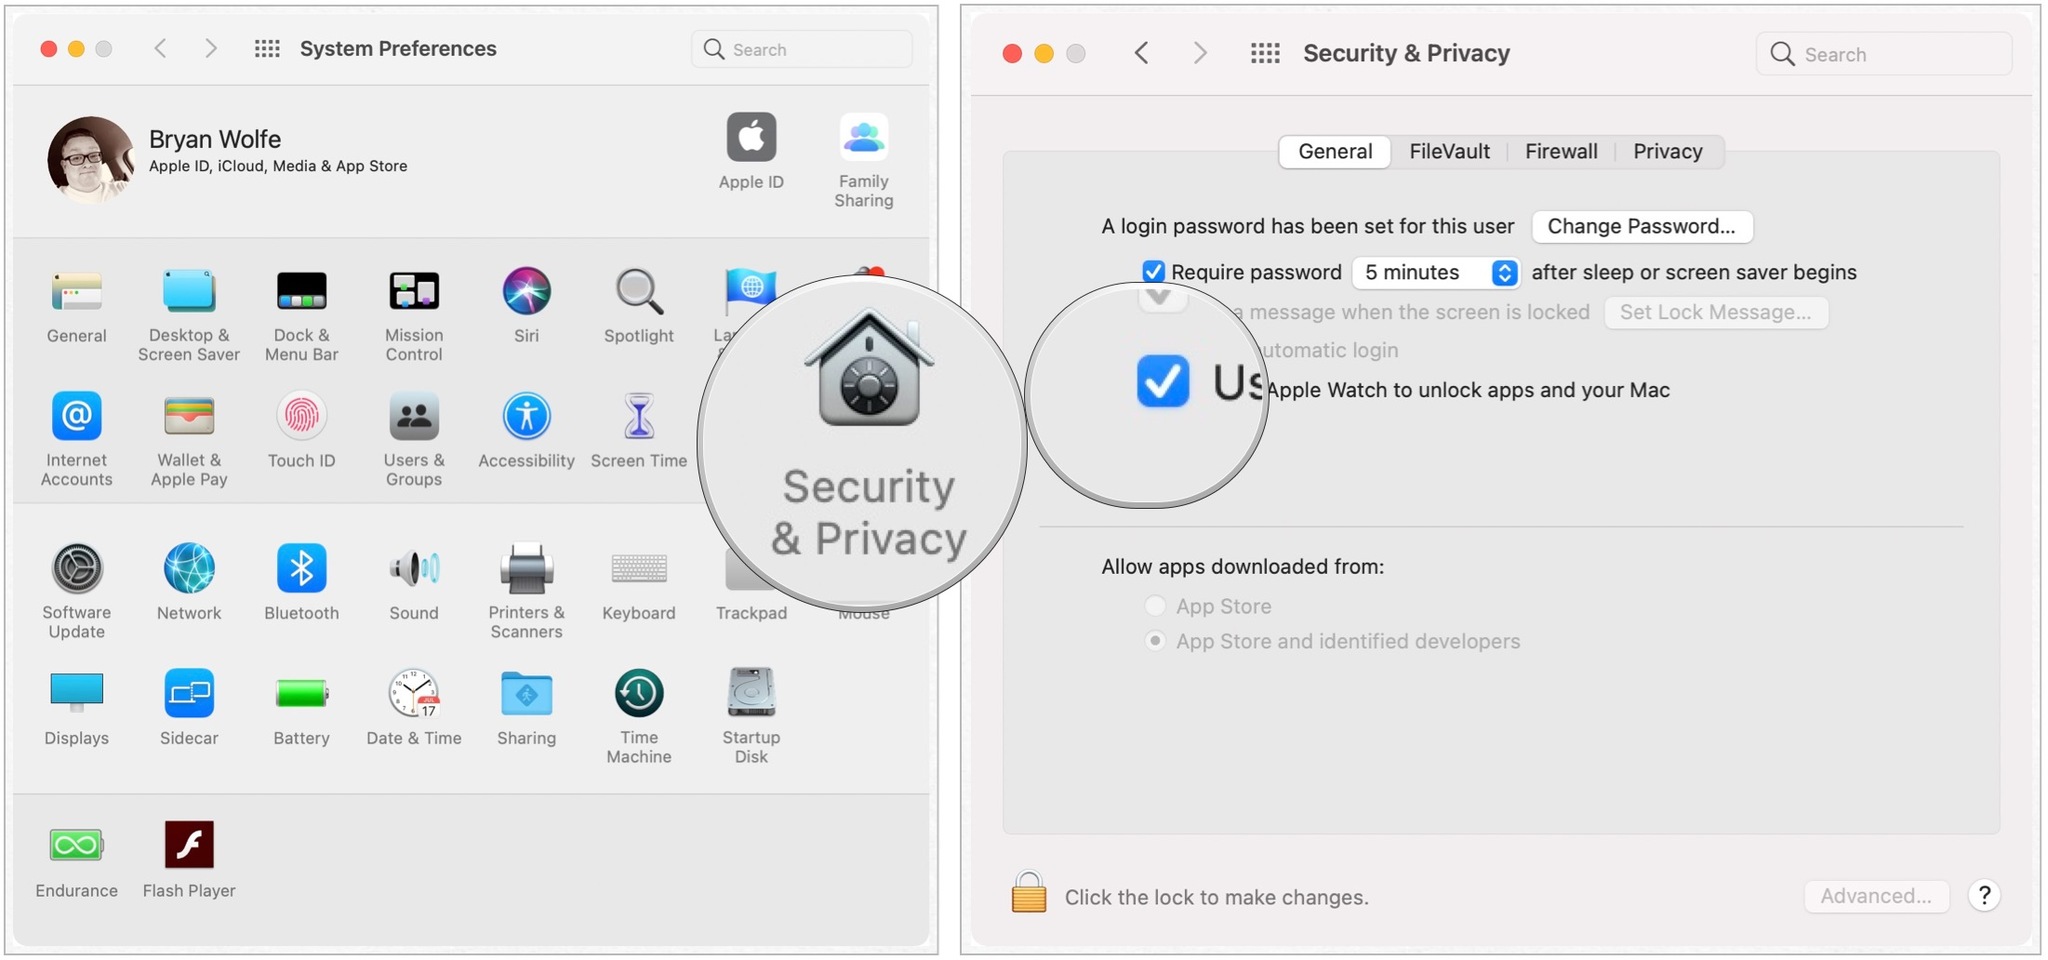 To enable Auto Unlock, click on Security & Privacy, then click on the General tab. Tick the box next to Use your Apple Watch to unlock apps and your Mac.